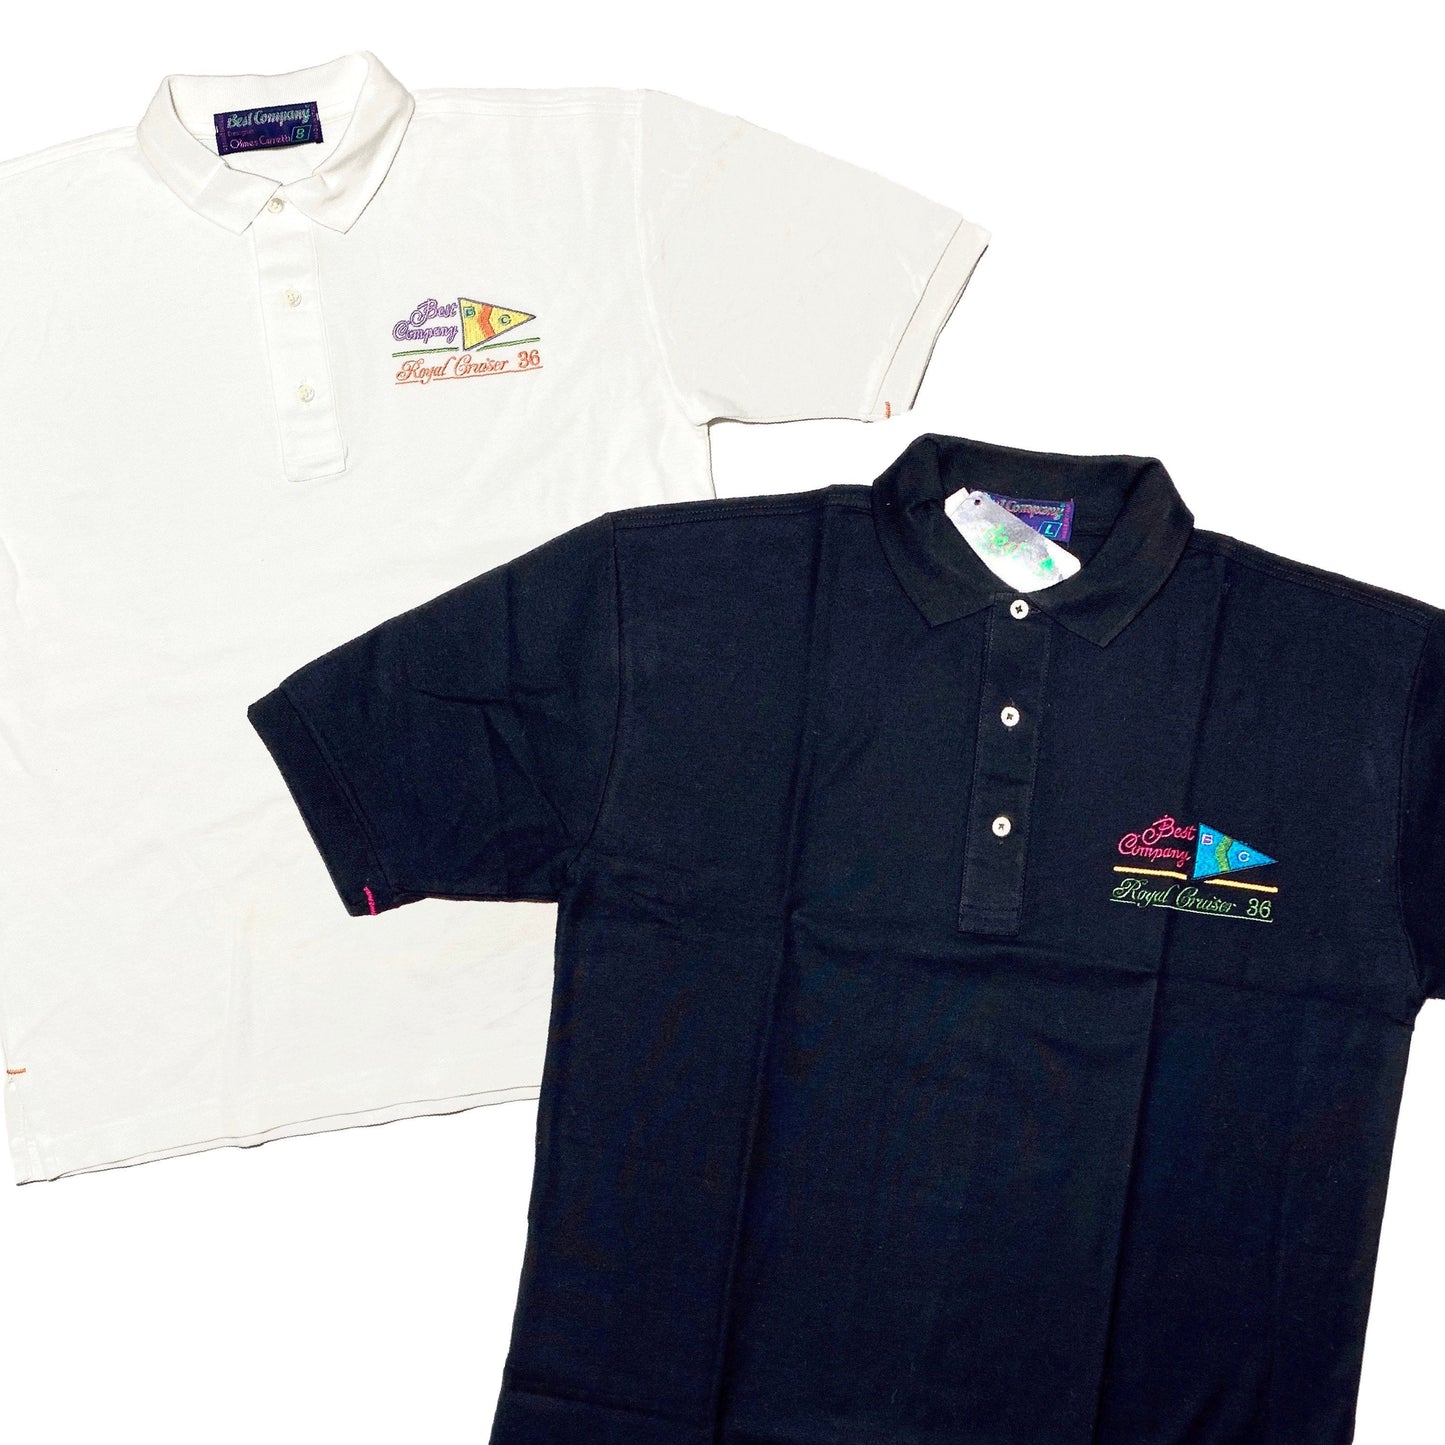 Best Company 80s Royal Cruiser 36 embroidered Black or White polo shirt new with tags, sizes available